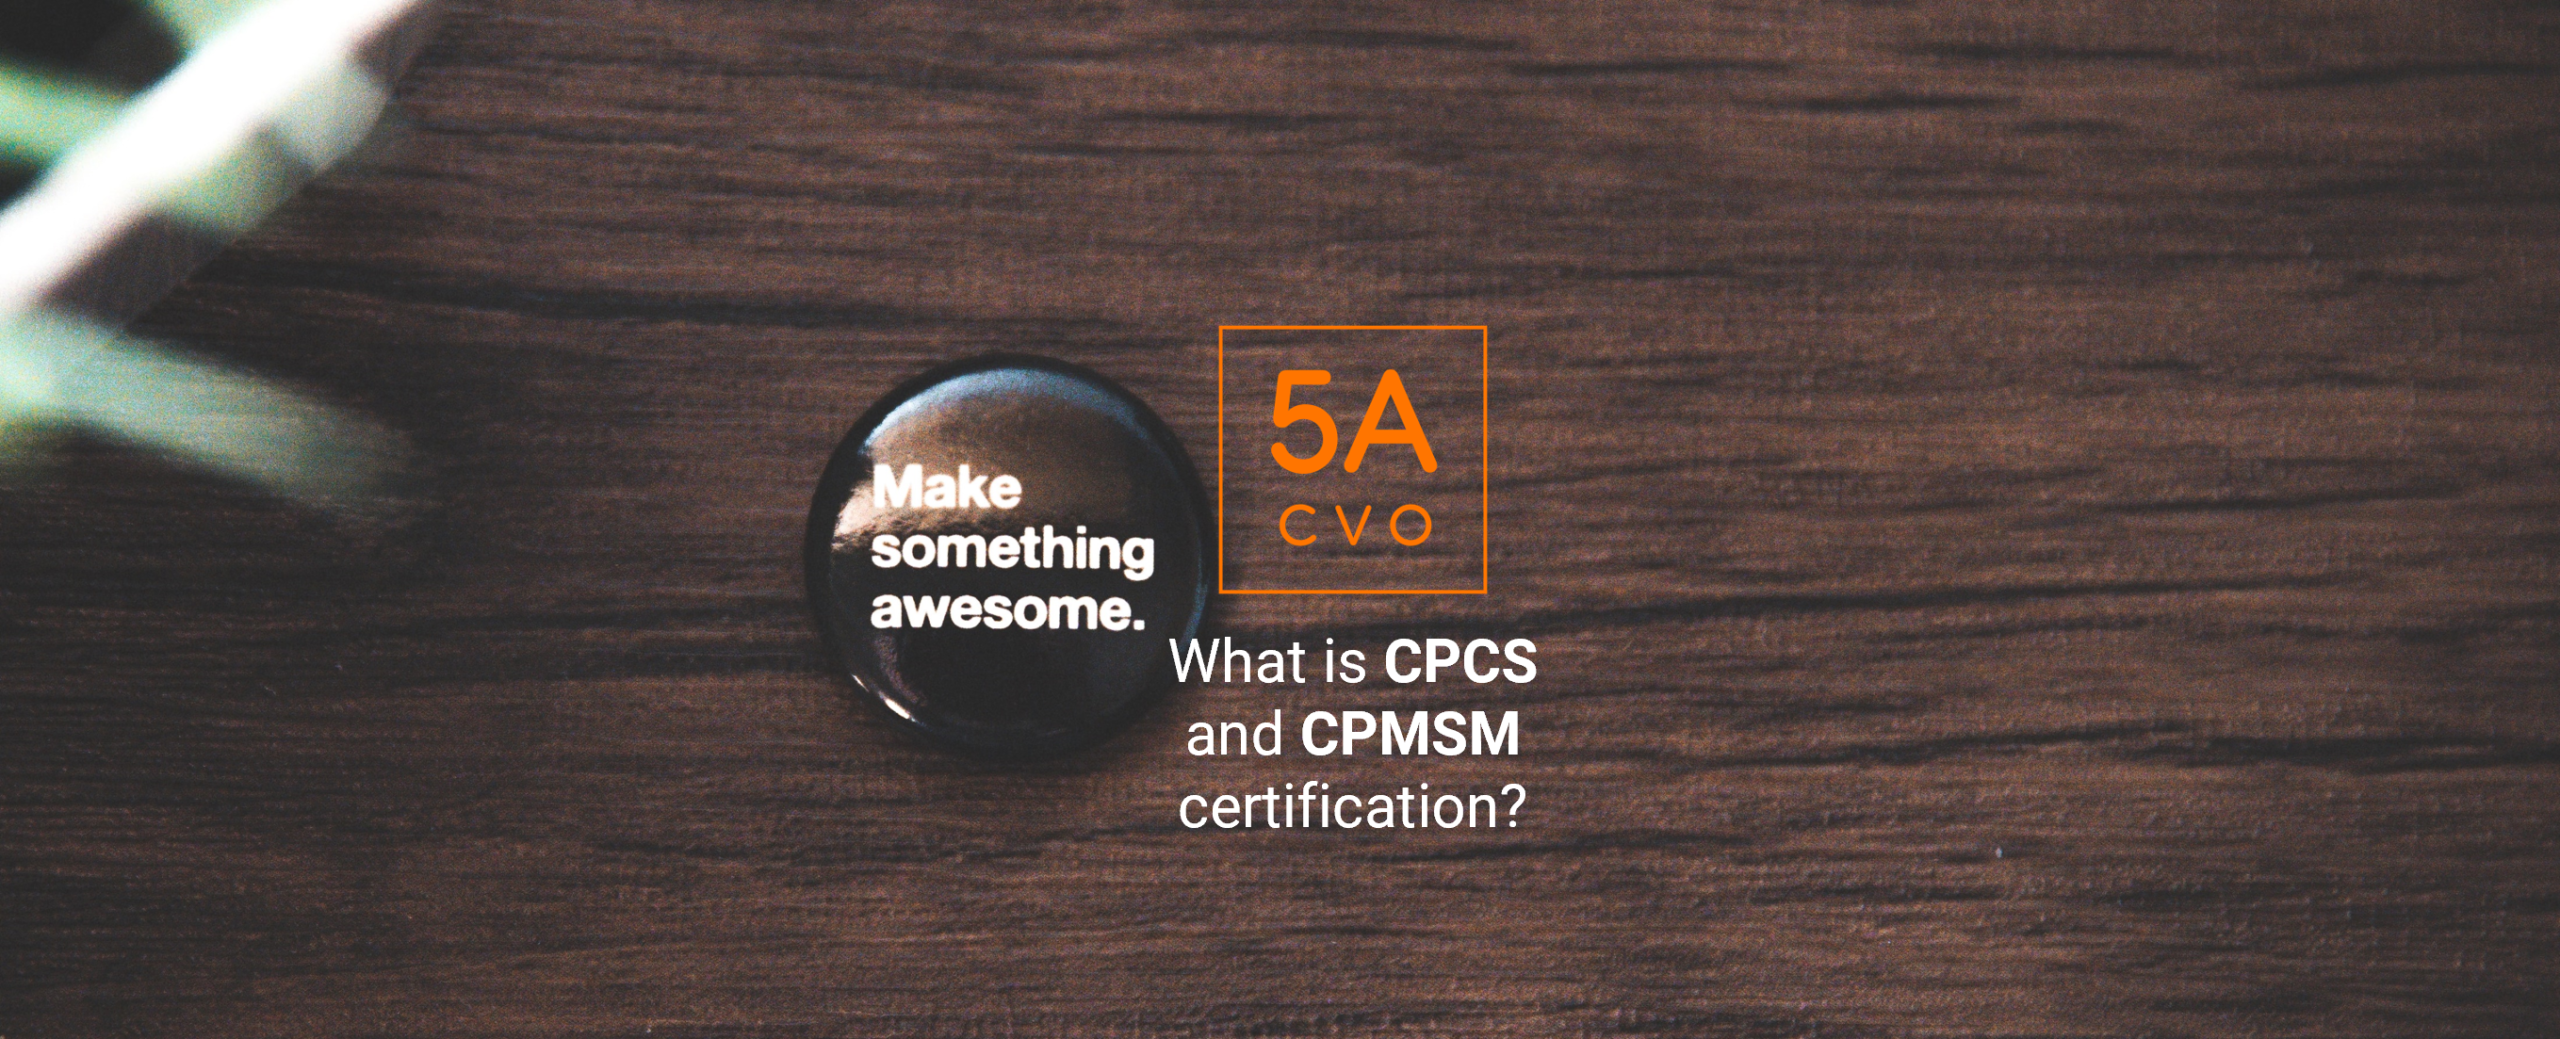 CPCS and CPMSM Credentialing Expert Certifications